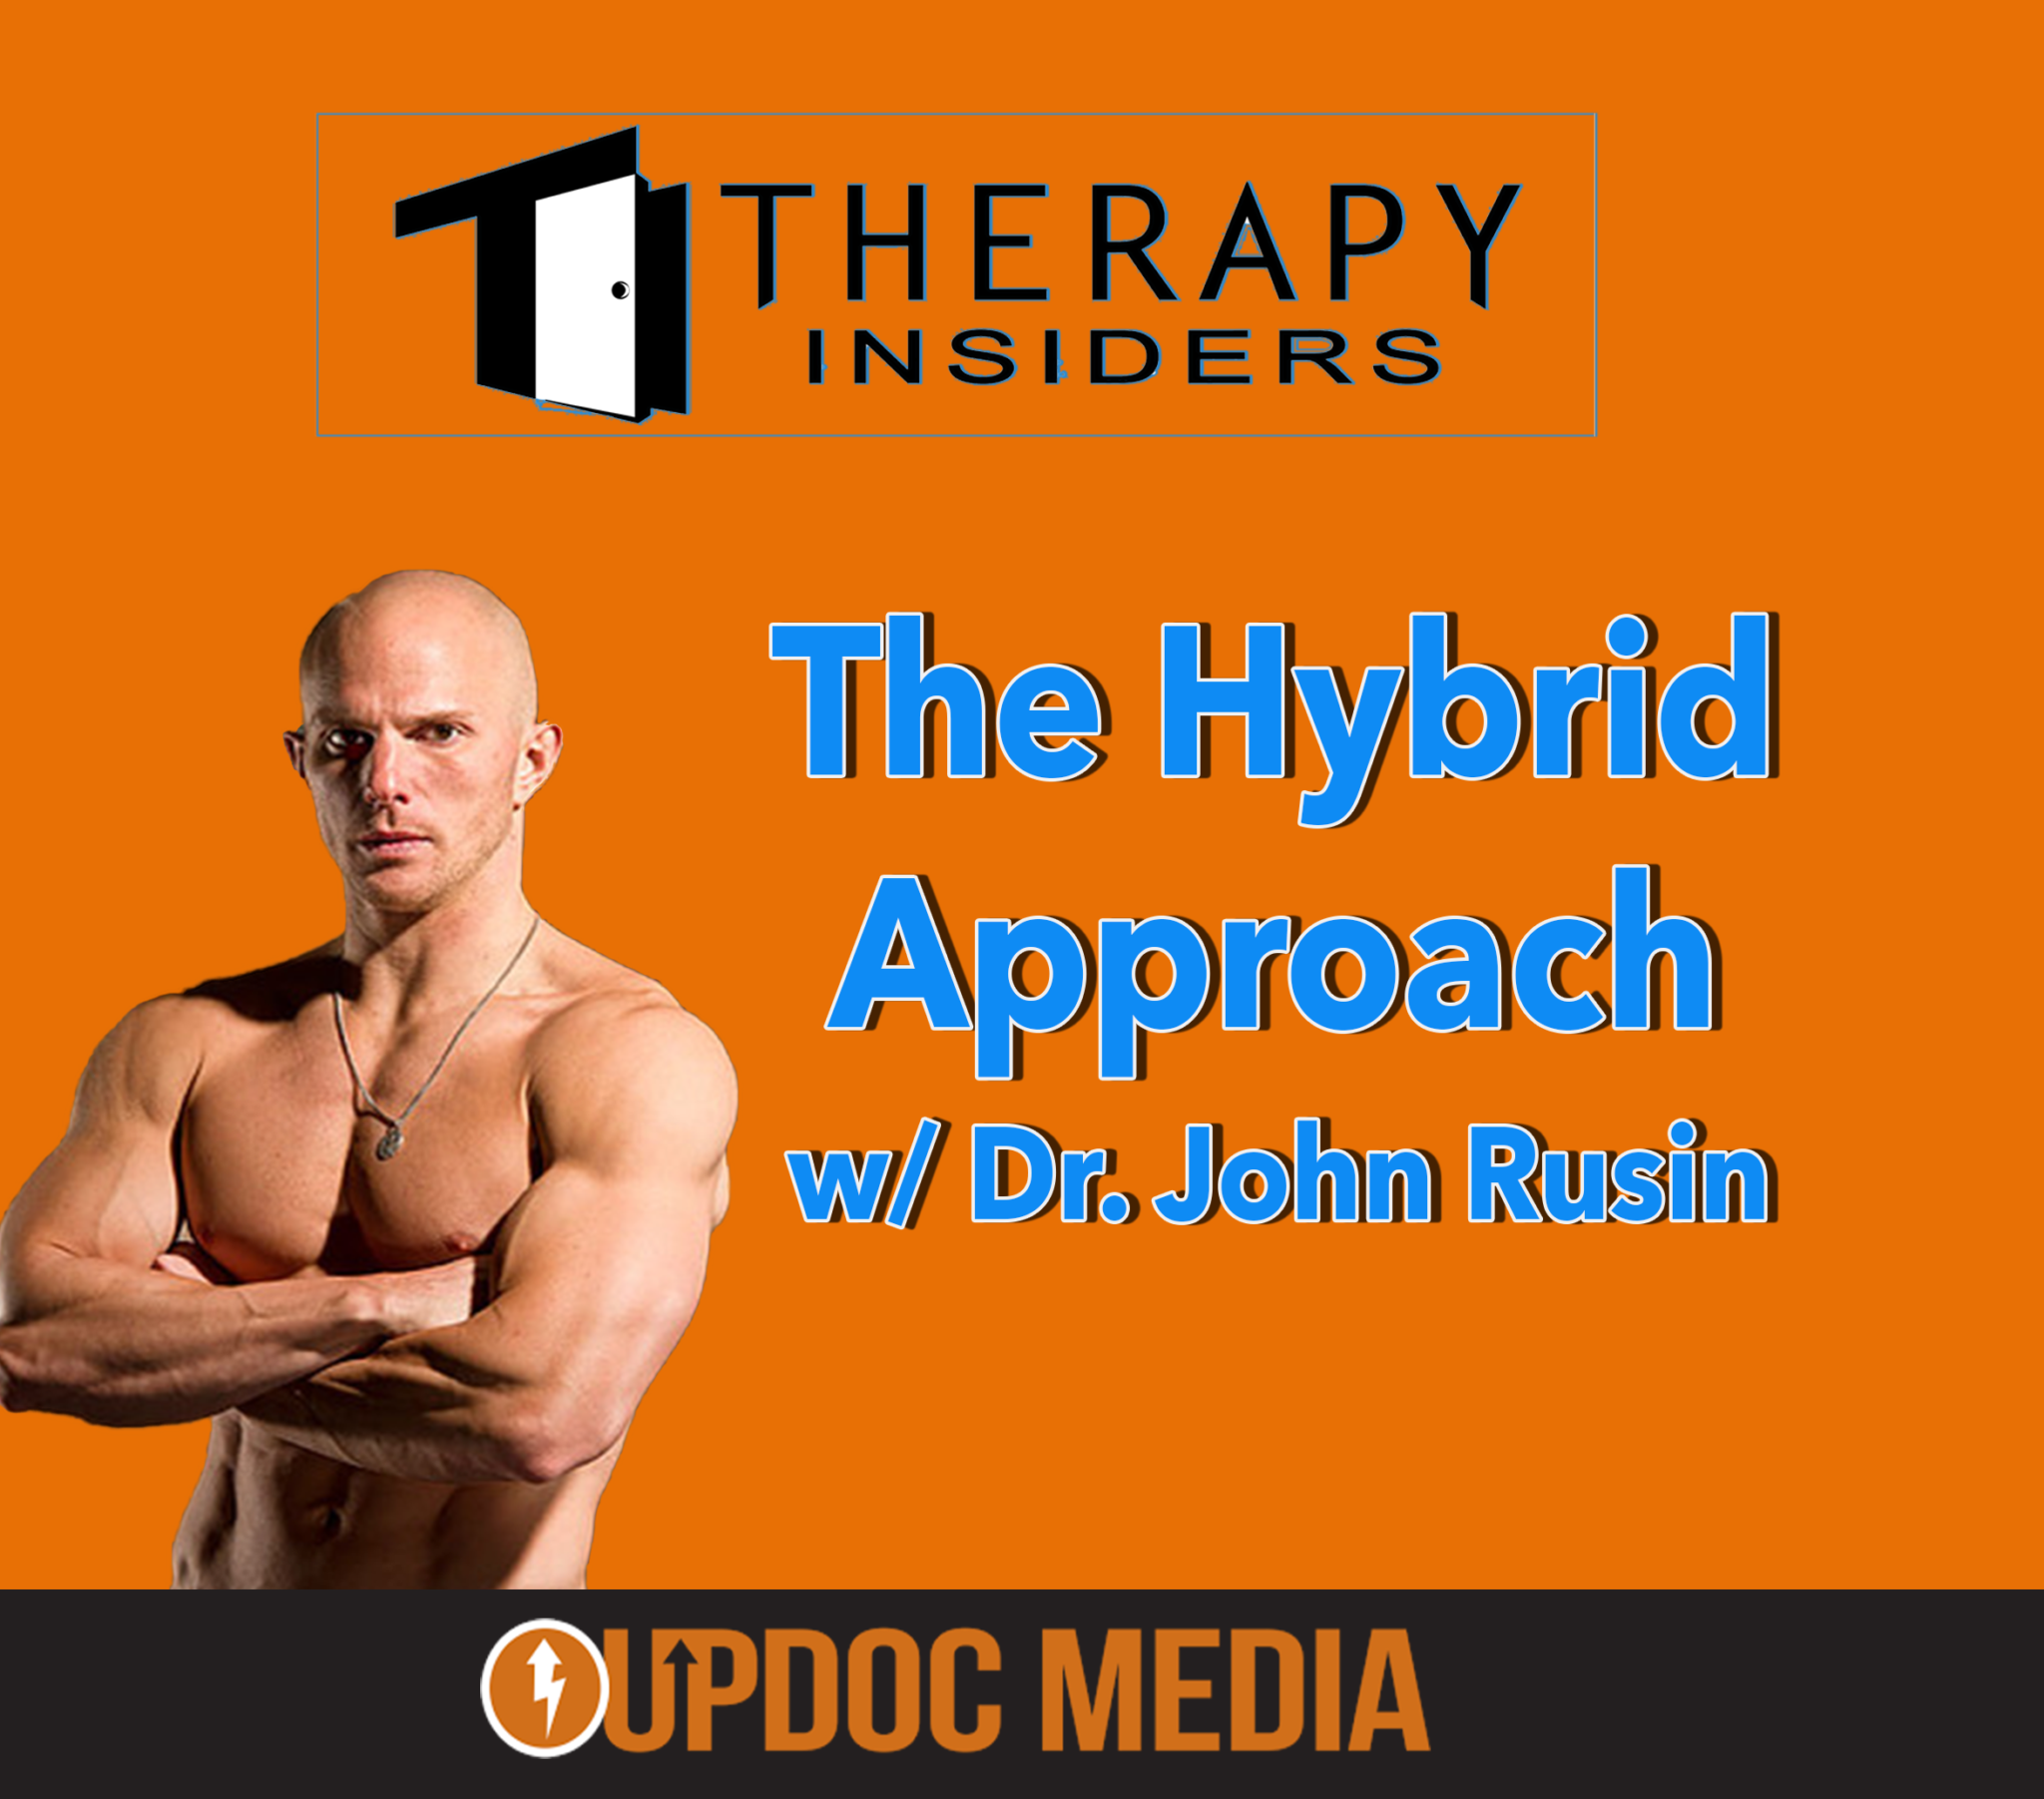 Dr. John Rusin on updoc media's Therapy Insiders podcast